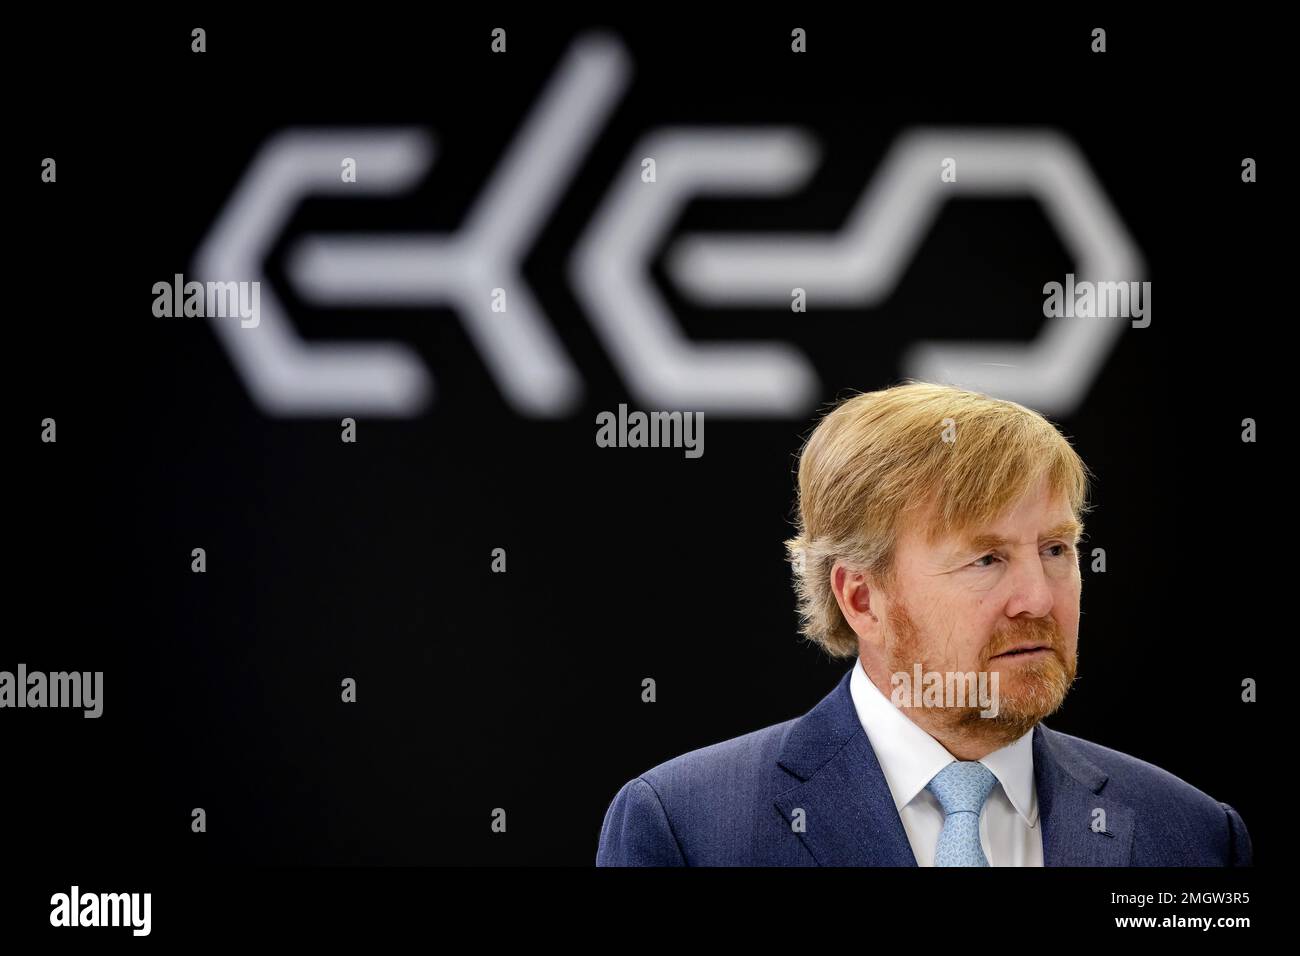 HELMOND - King Willem-Alexander is given a guided tour during the opening of ELEO's new battery factory on the Automotive Campus. ELEO designs and builds high-quality battery systems. ANP ROBIN VAN LONKHUIJSEN netherlands out - belgium out Stock Photo